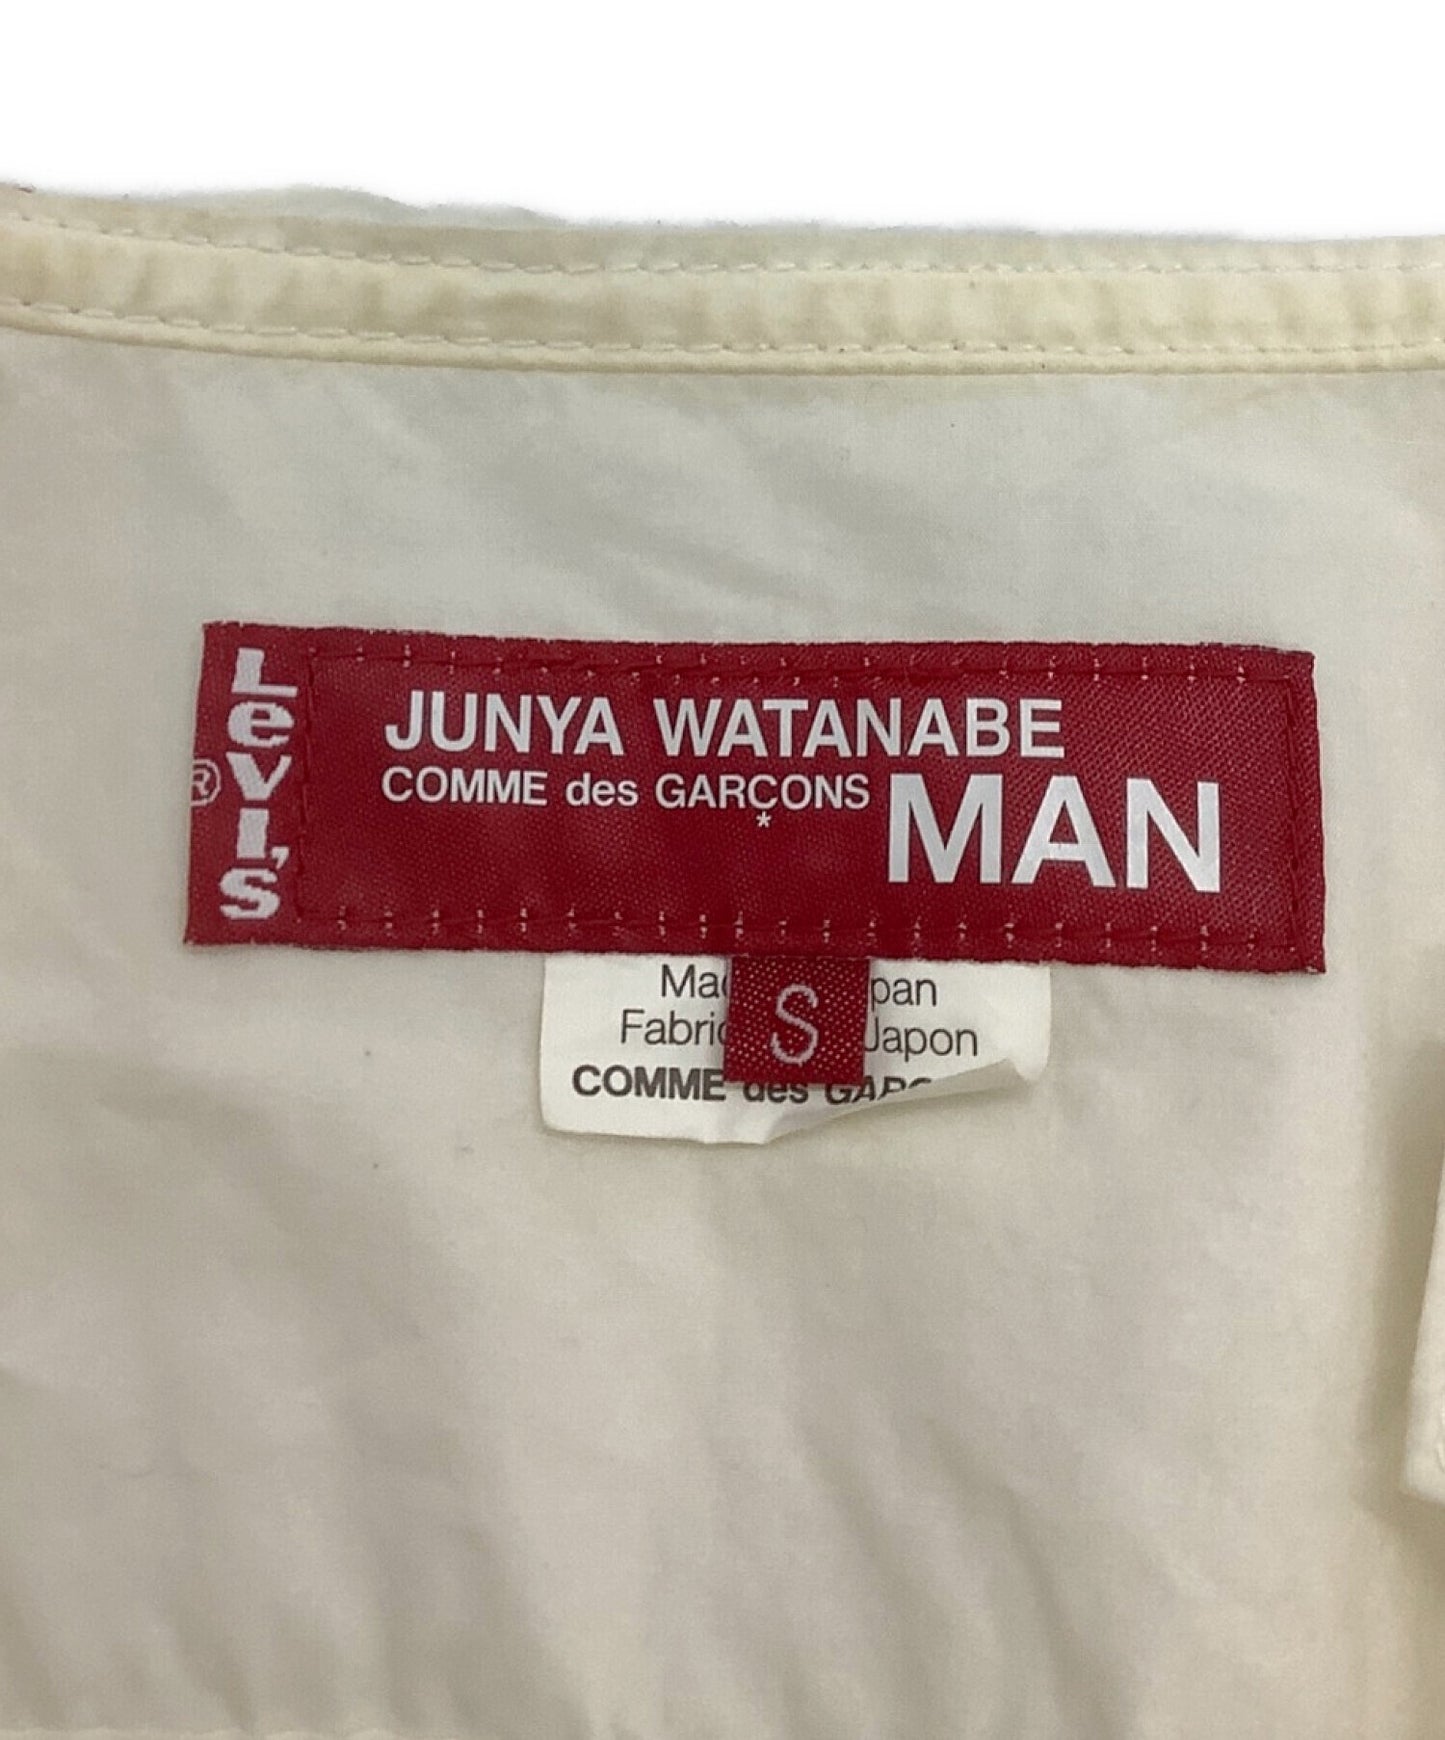 Junya Watanabe Comme des Garcons Man X Levis hooded夾克